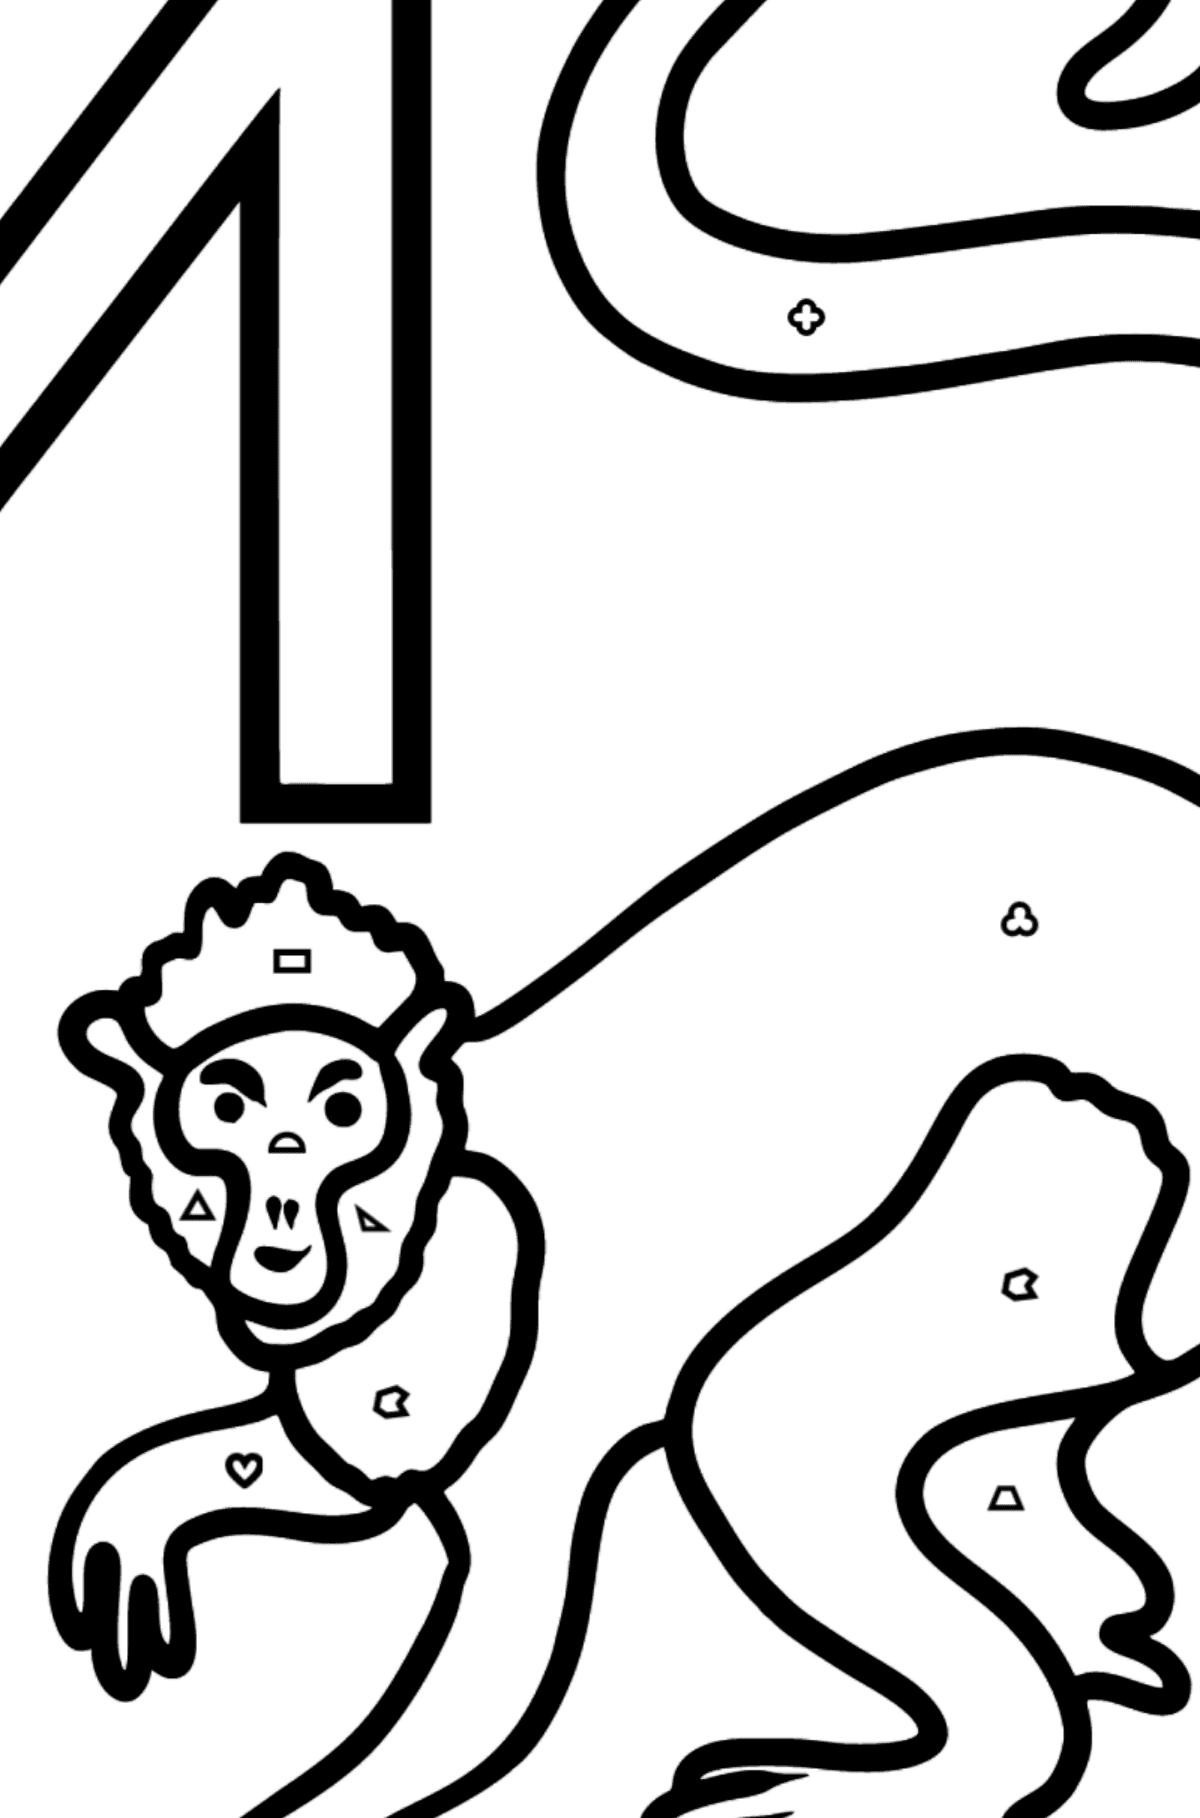 Portuguese Letter M coloring pages - MACACO - Coloring by Geometric Shapes for Kids